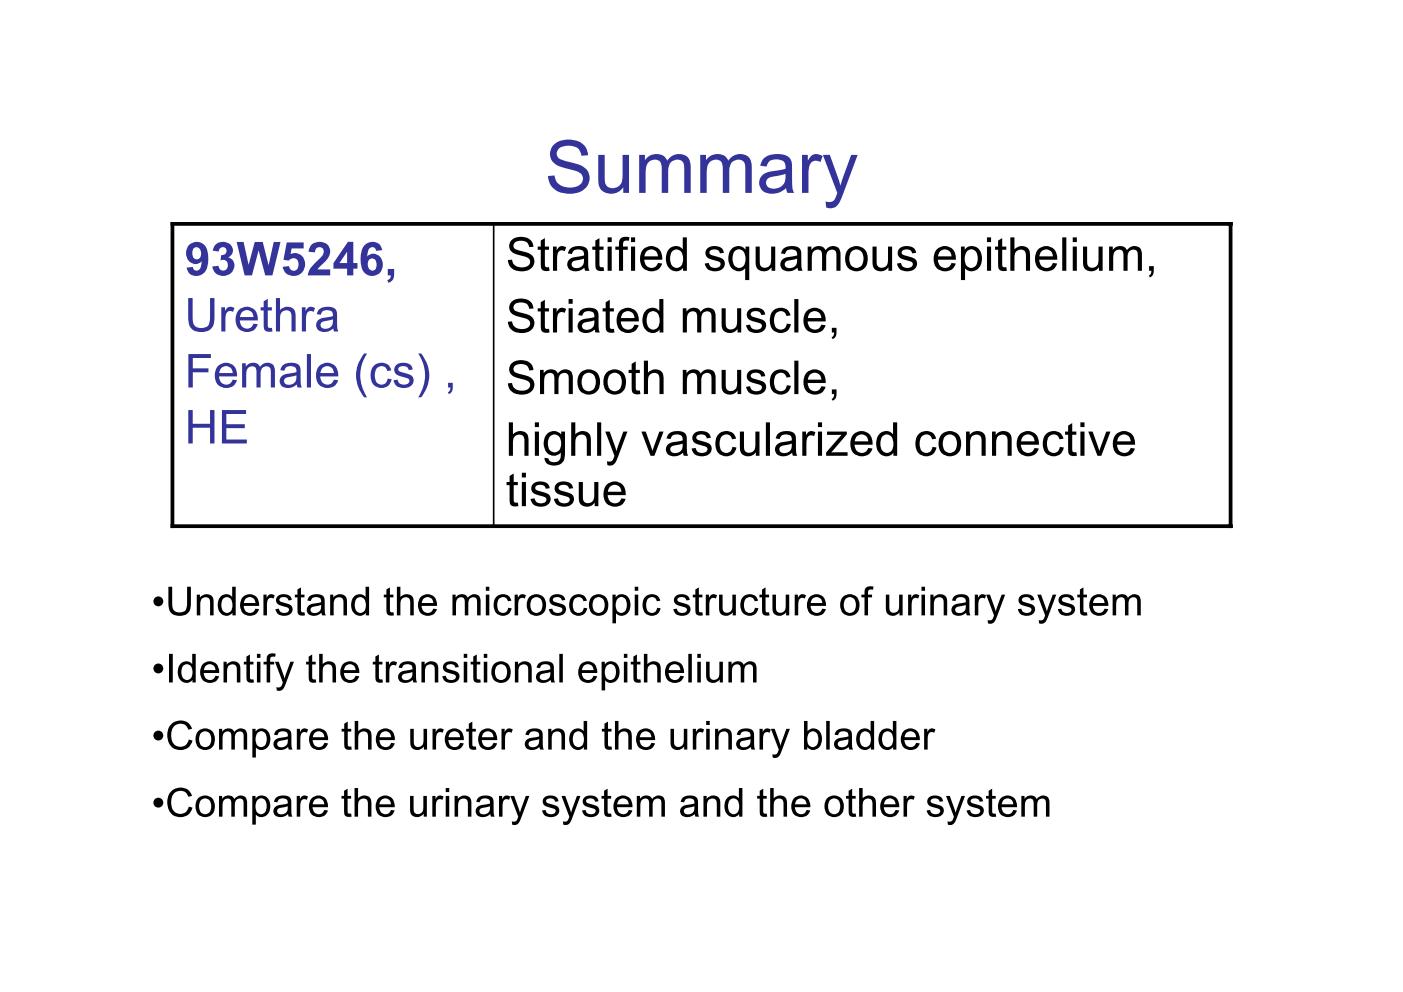 block8_31.jpg - Summary93W5246, Urethra Female (cs), HE                                Stratified squamous epithelium,Striated muscle, Smooth muscle,highly vascularized connective tissue¡EUnderstand the microscopic structure of urinary system¡EIdentify the transitional epithelium¡ECompare the ureter and the urinary bladder¡ECompare the urinary system and the other system